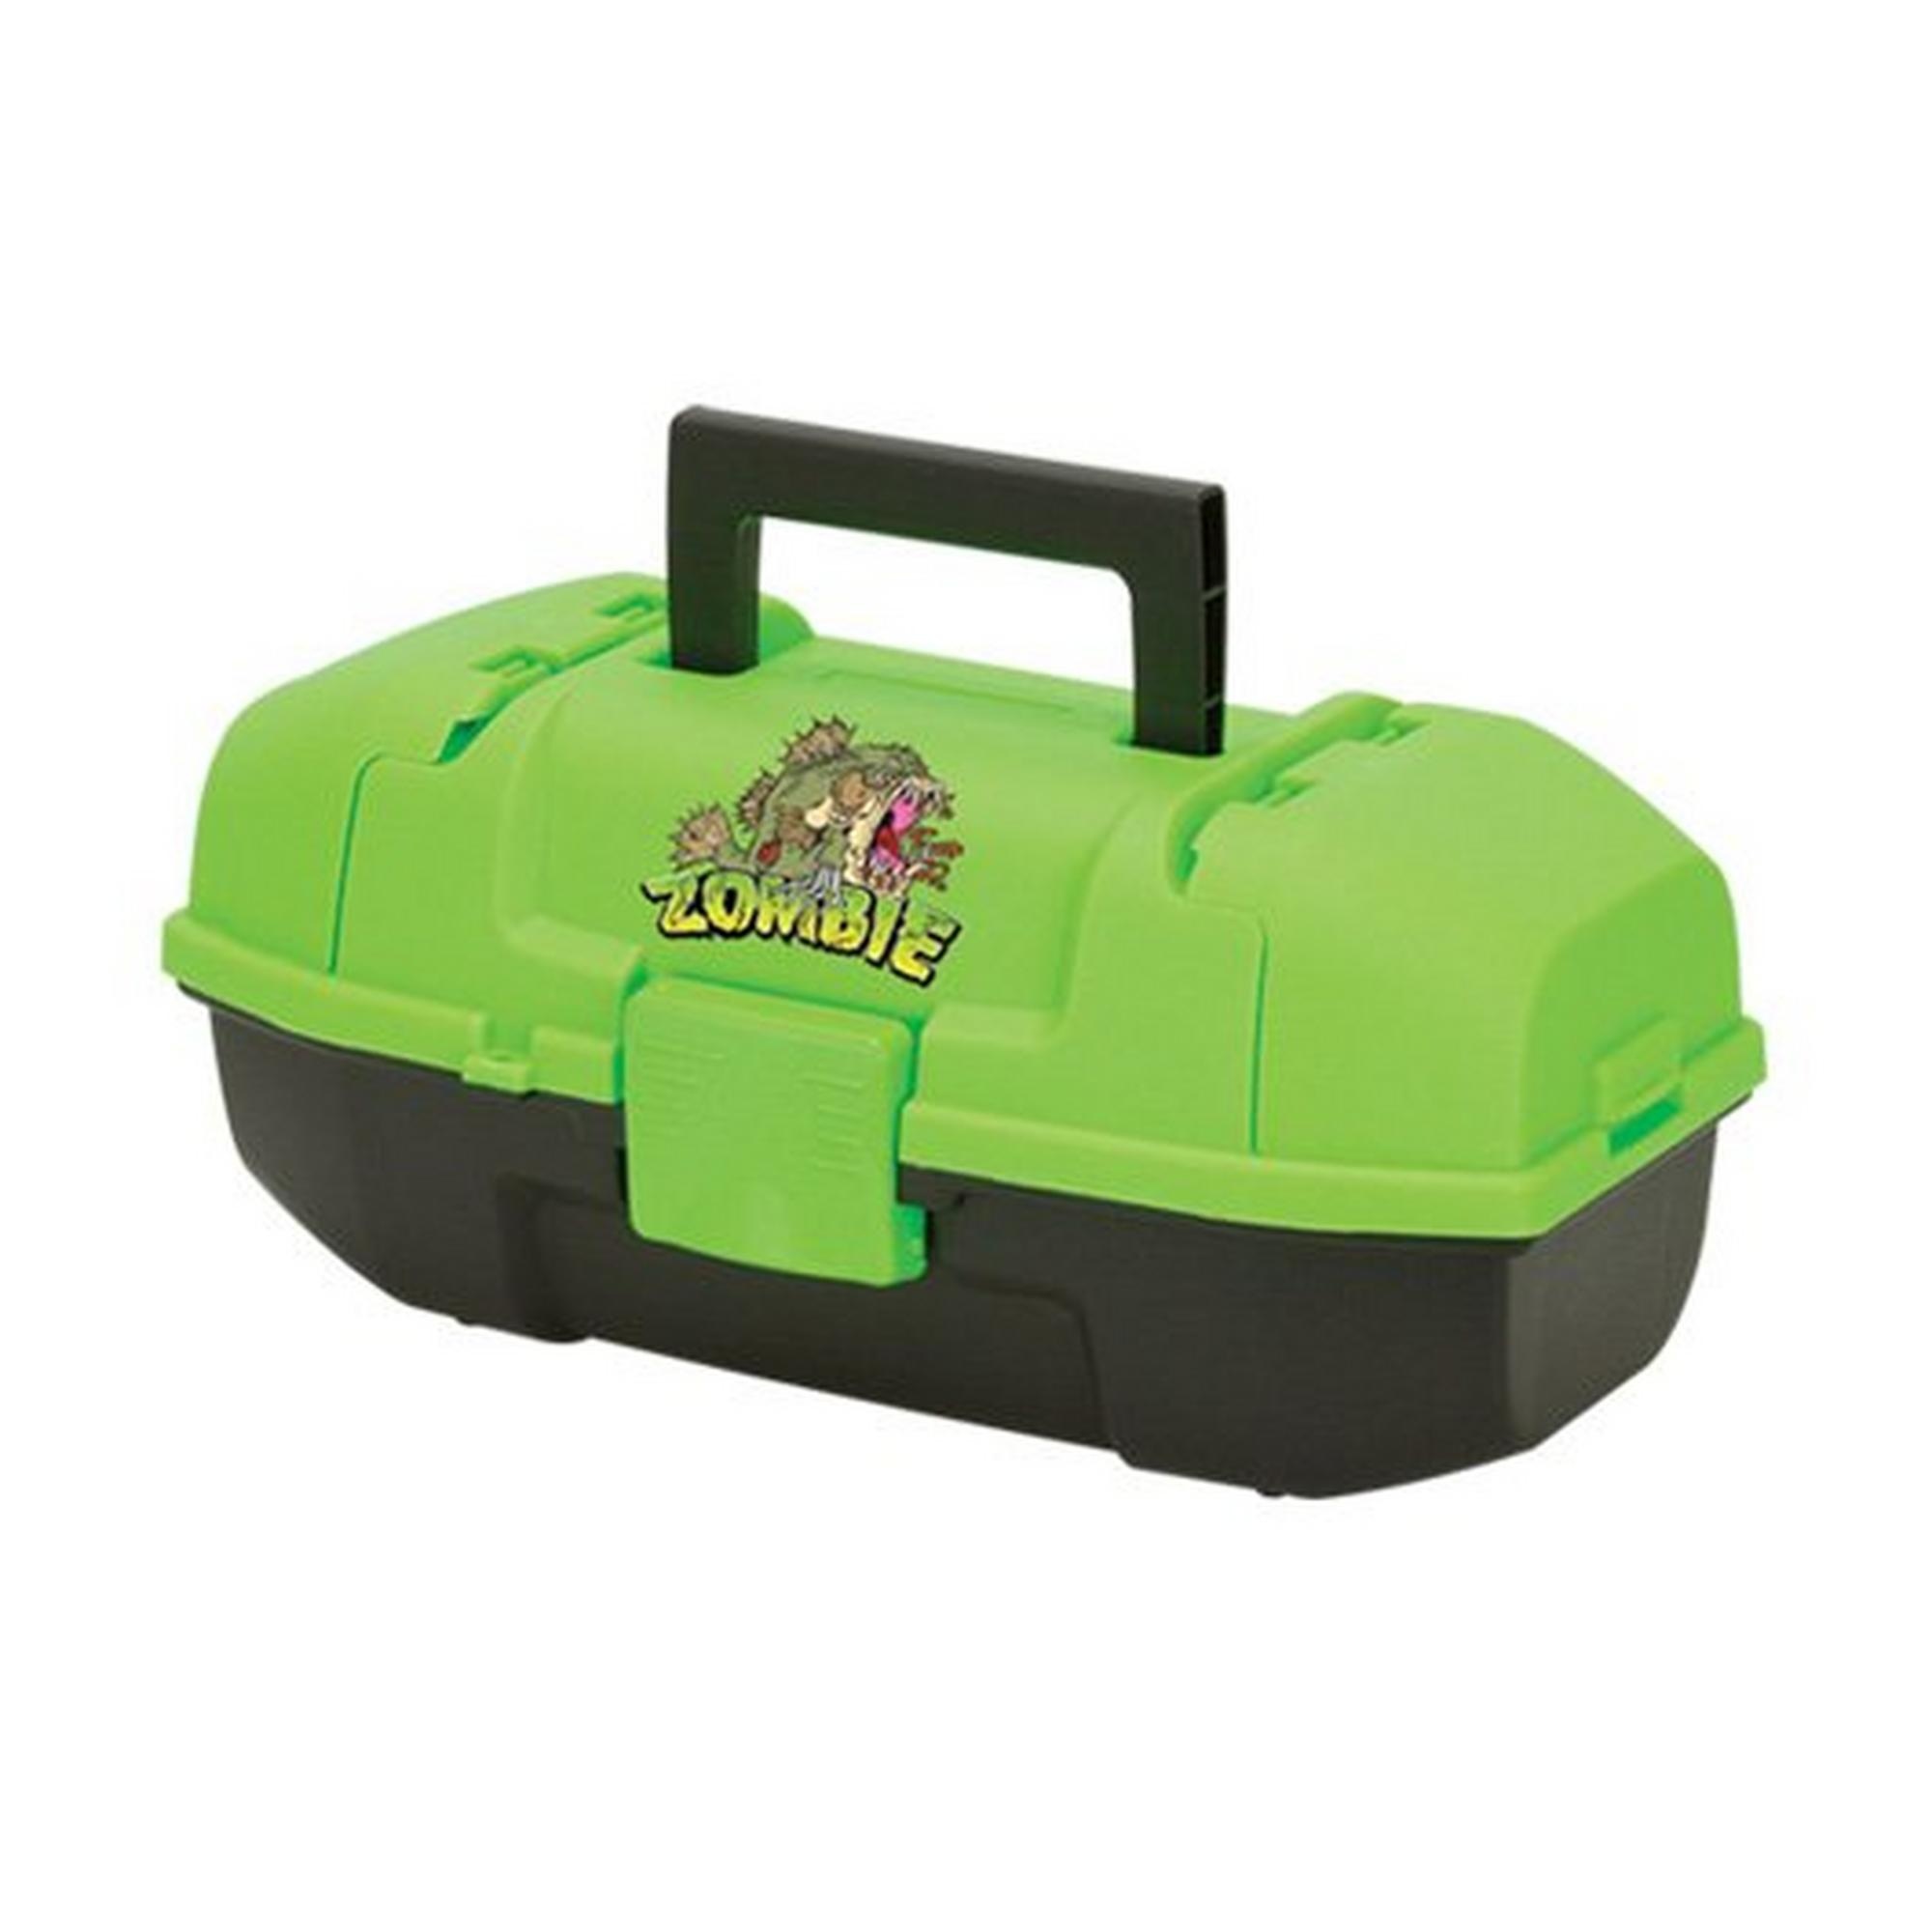 Youth Tackle Box - Zombie Fish - NeonGreen/Black